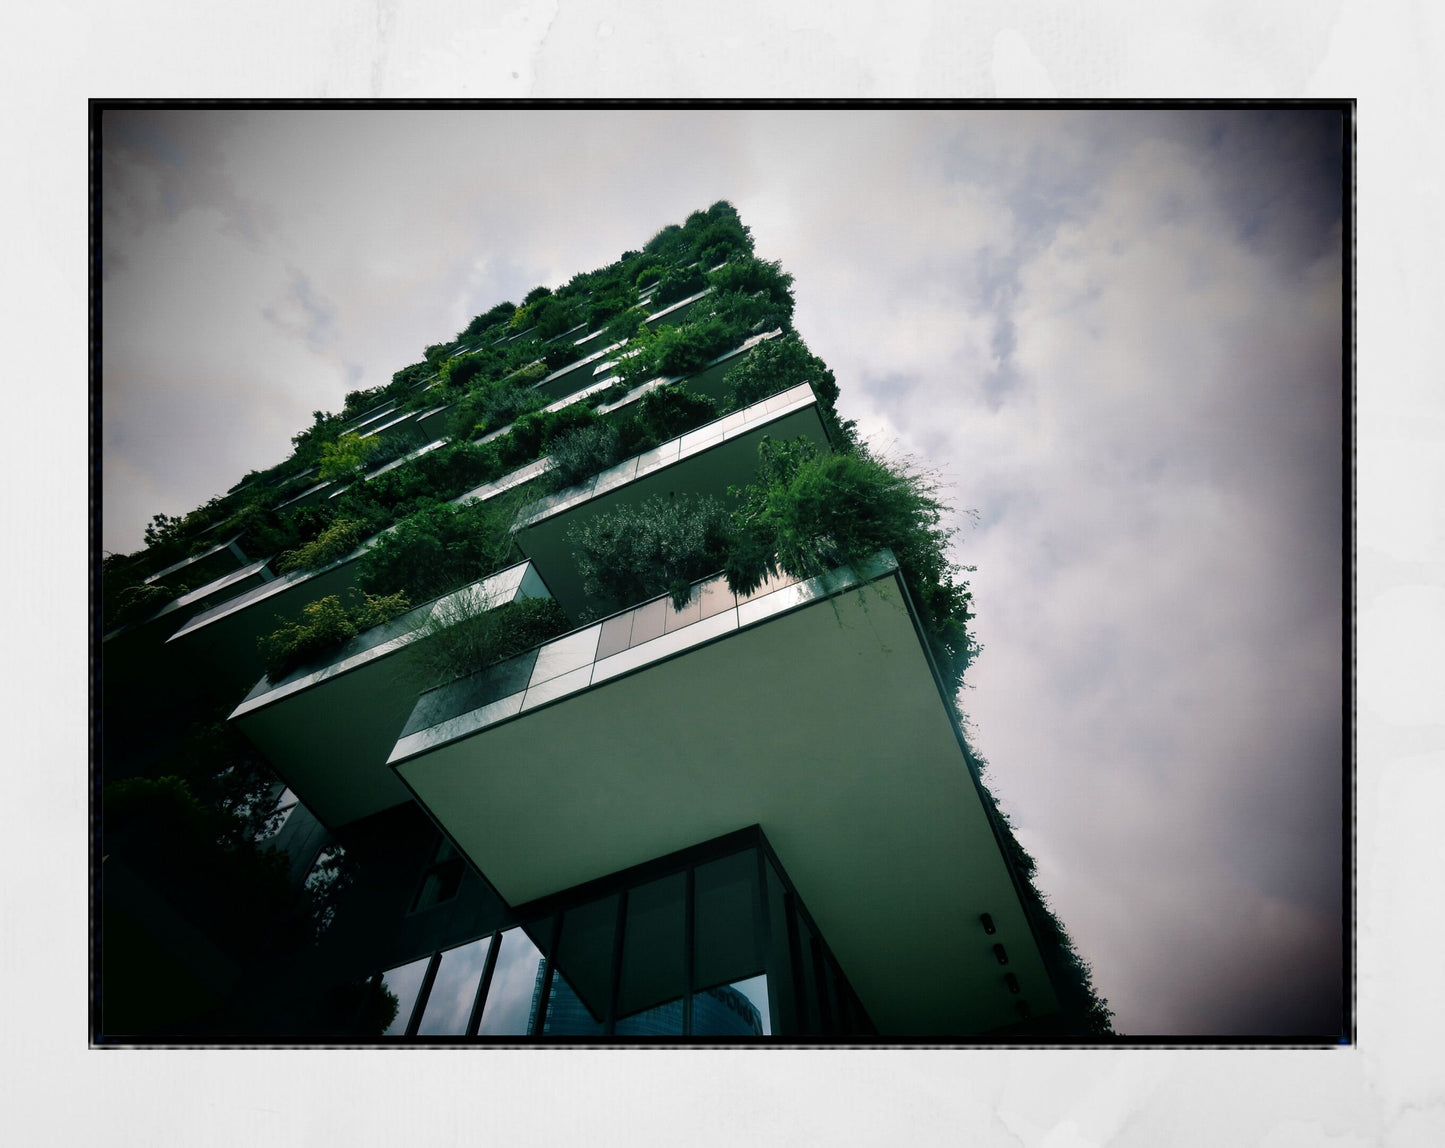 Milan Vertical Forest Bosco Verticale Architecture Photography Print Poster